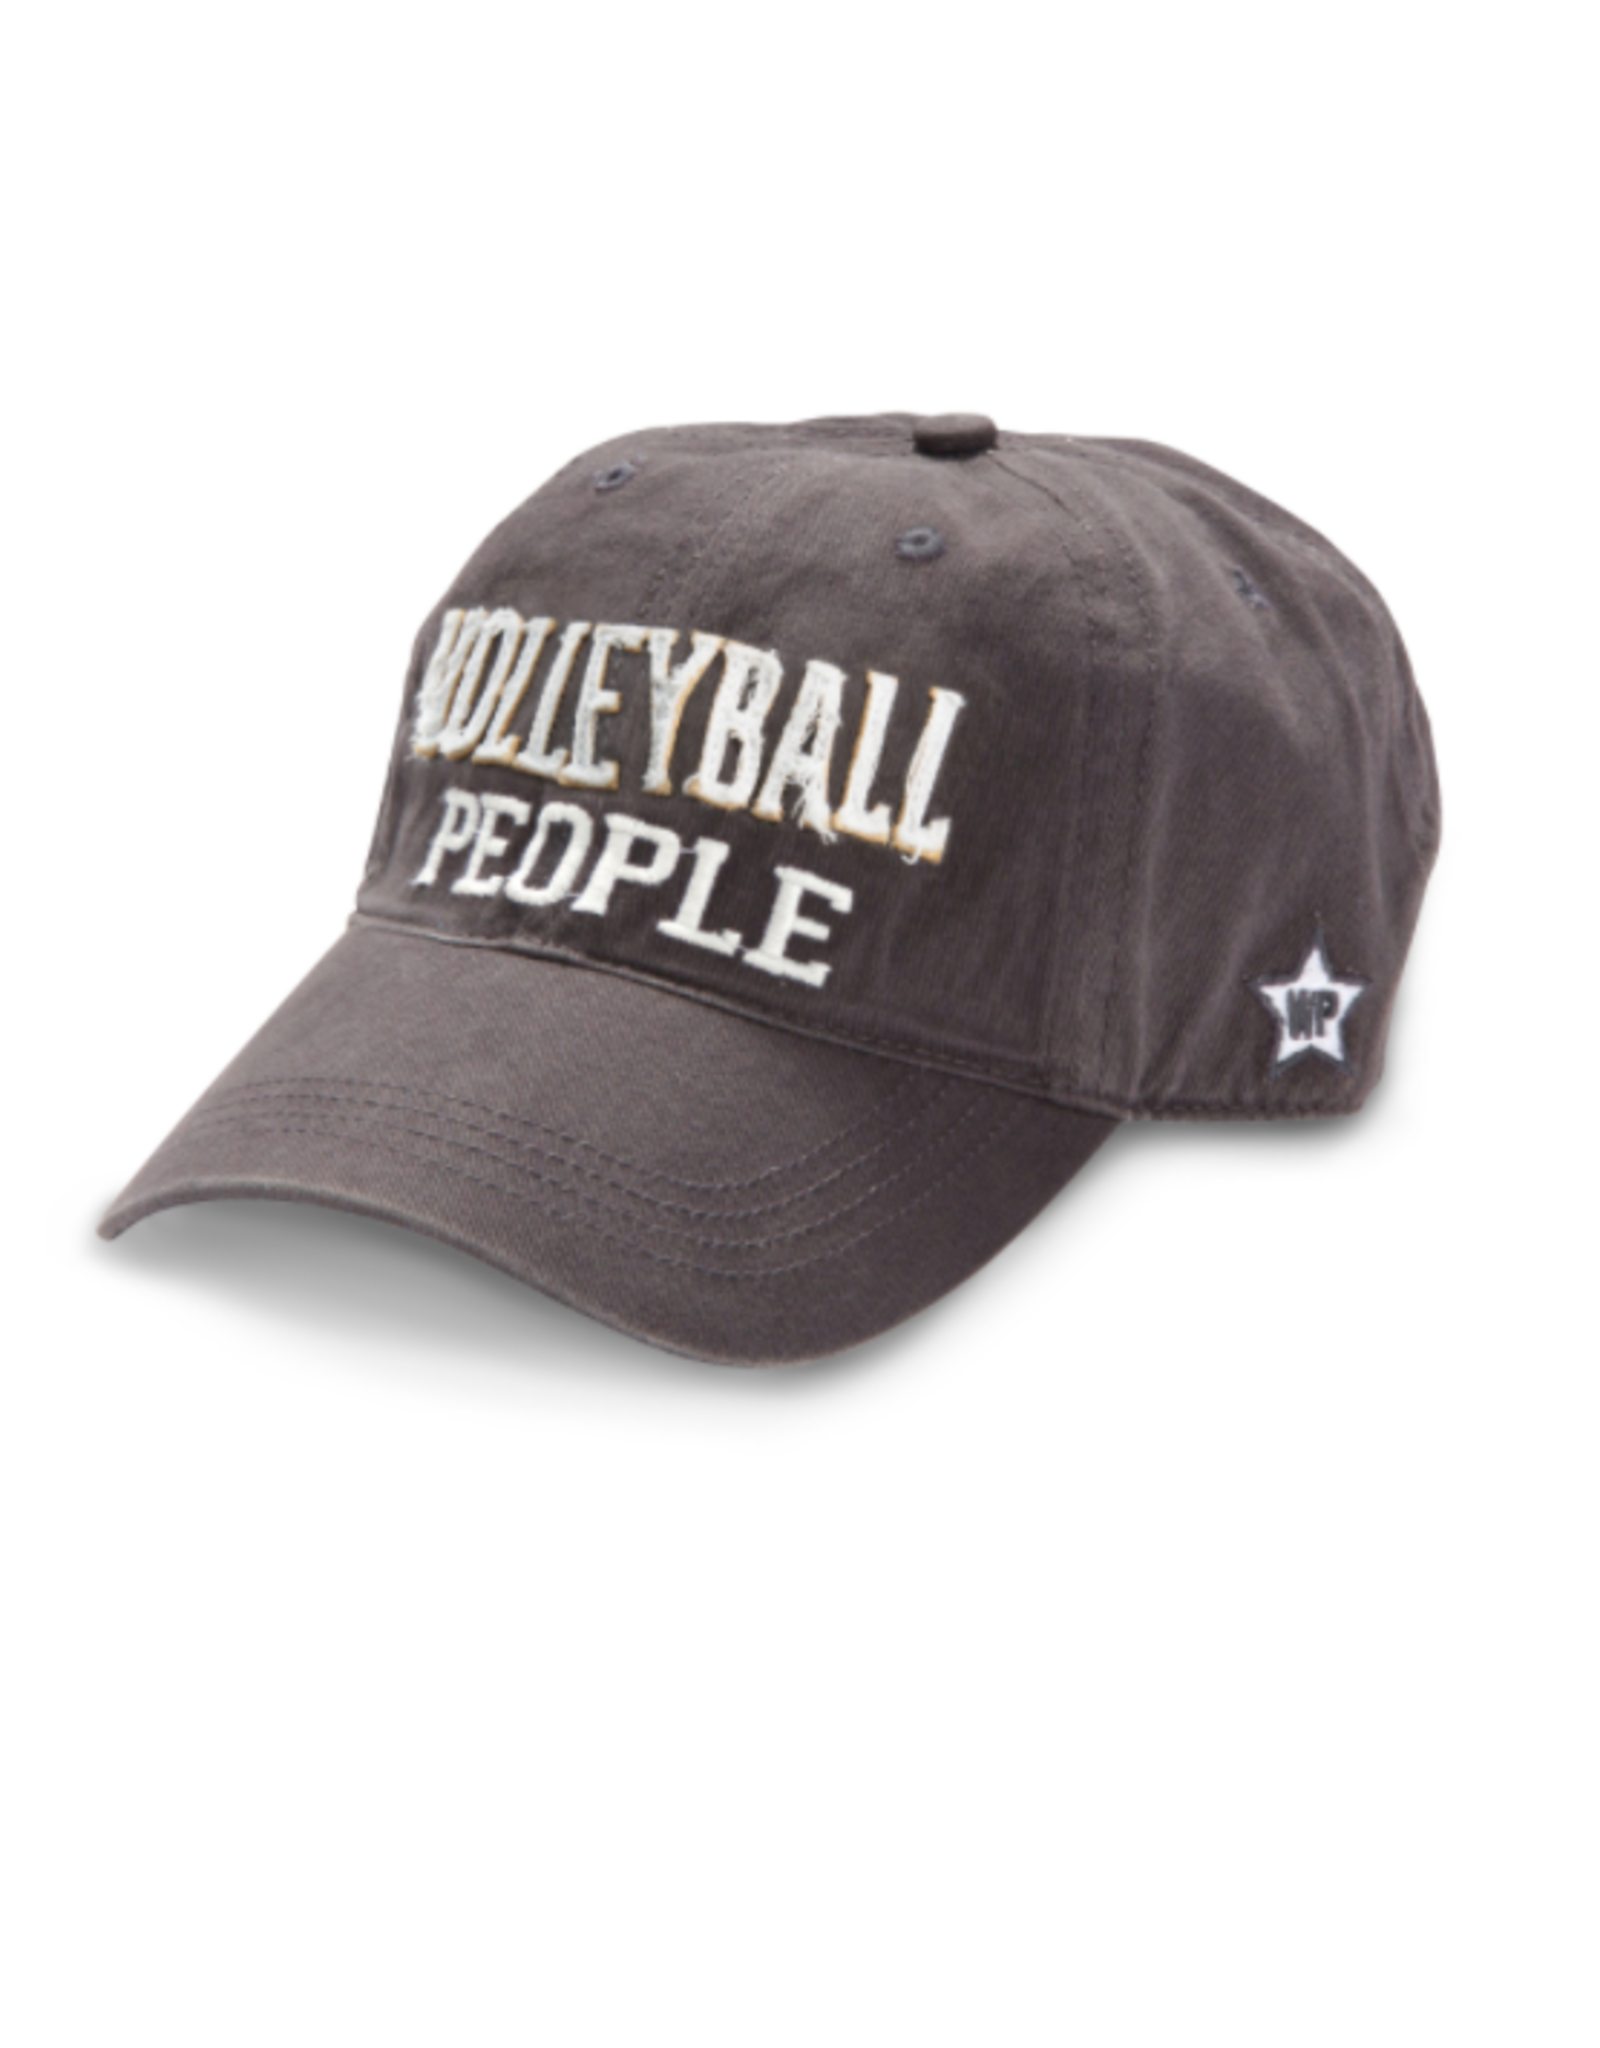 We People Volleyball People Ball Hat, grey